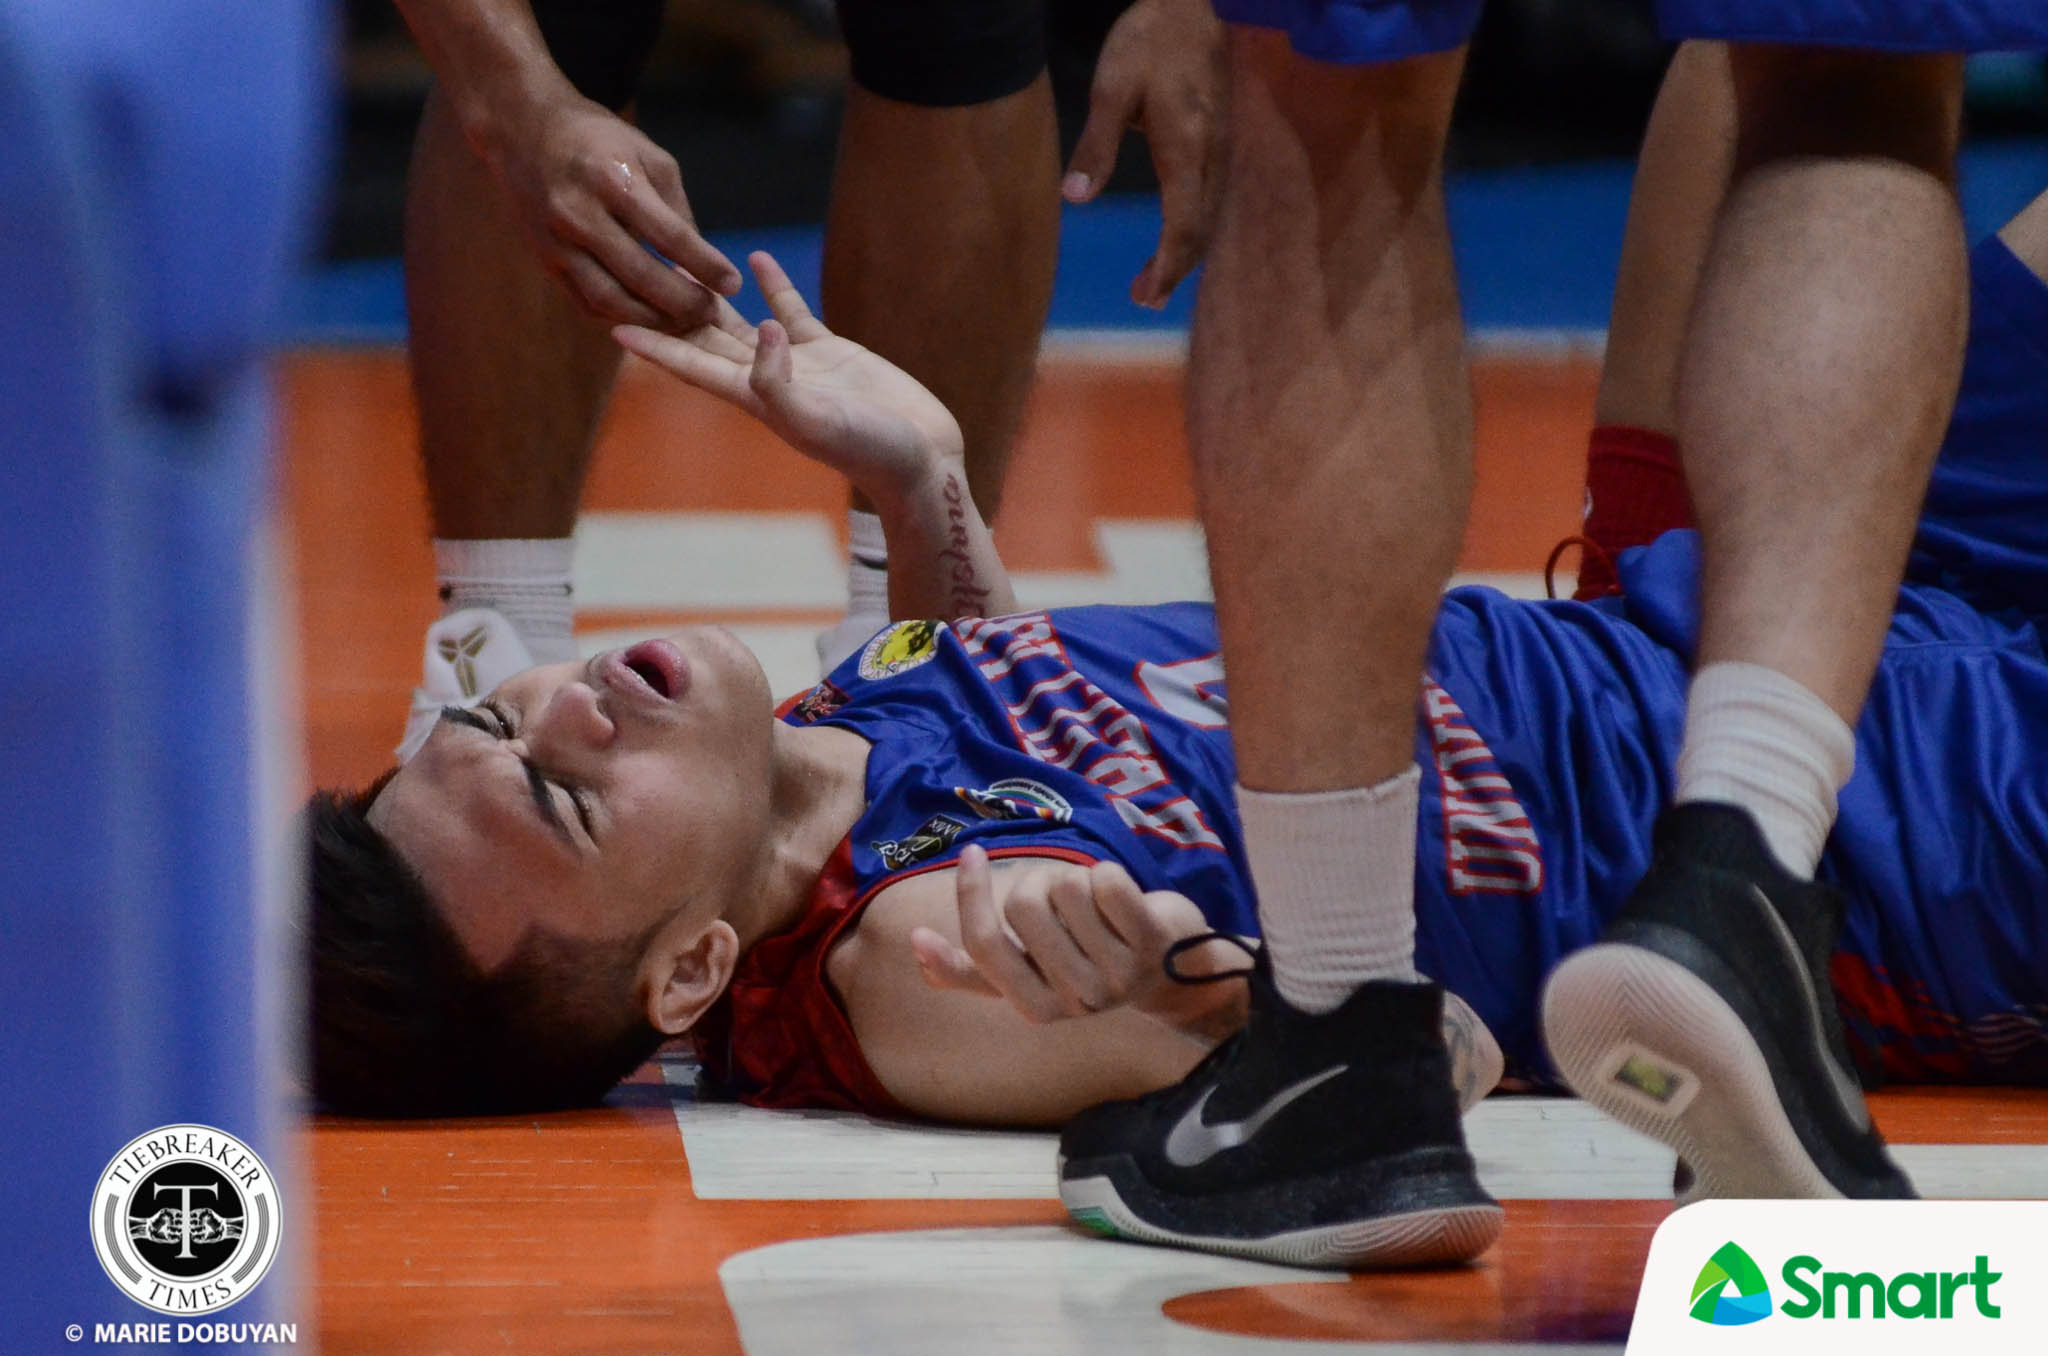 NCAA-93-AU-SSCR-Salado-1376 Kent Salado re-injures MCL, out for Go for Gold campaign AU Basketball CSB NCAA News PBA D-League  - philippine sports news